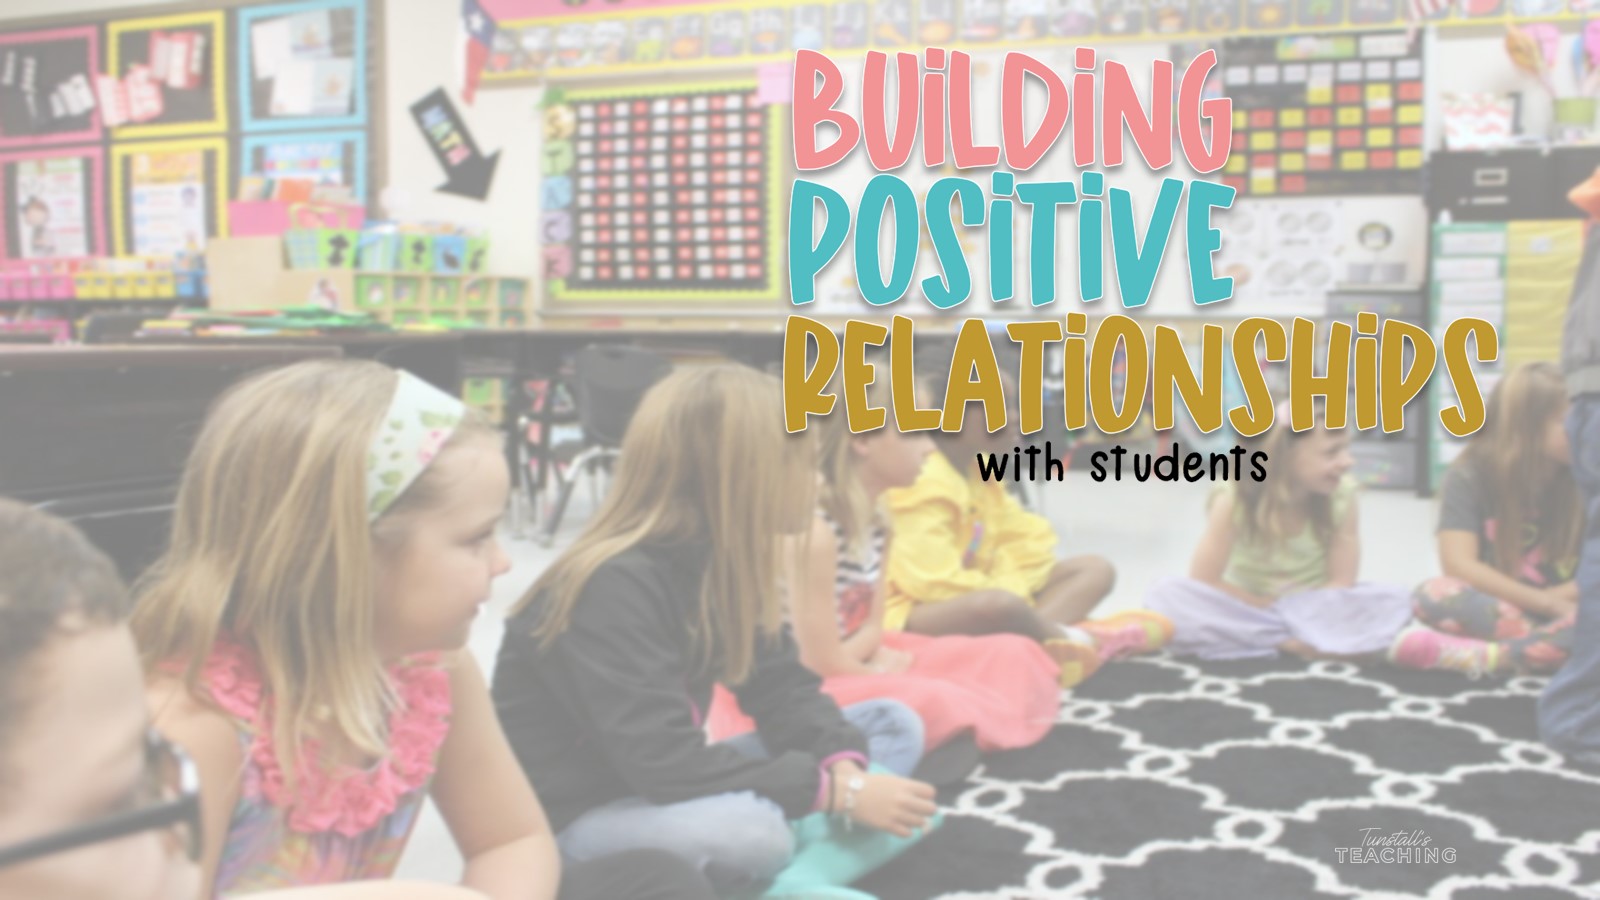 Building Positive Relationships with Students